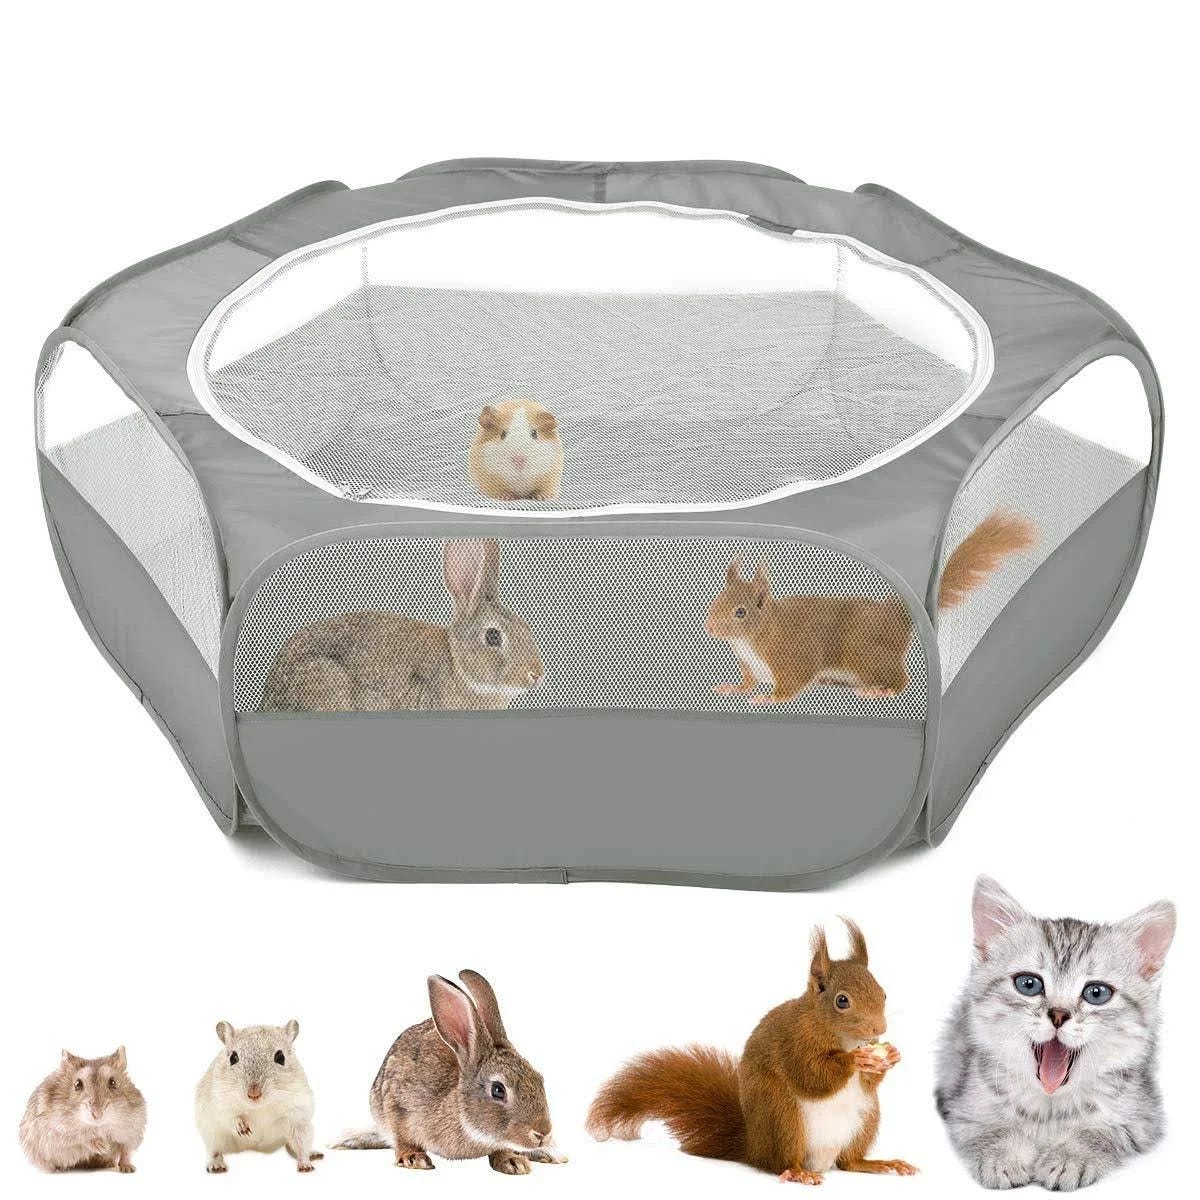 Comfortable and Waterproof Playpen for Rabbits and Small Pets | Image